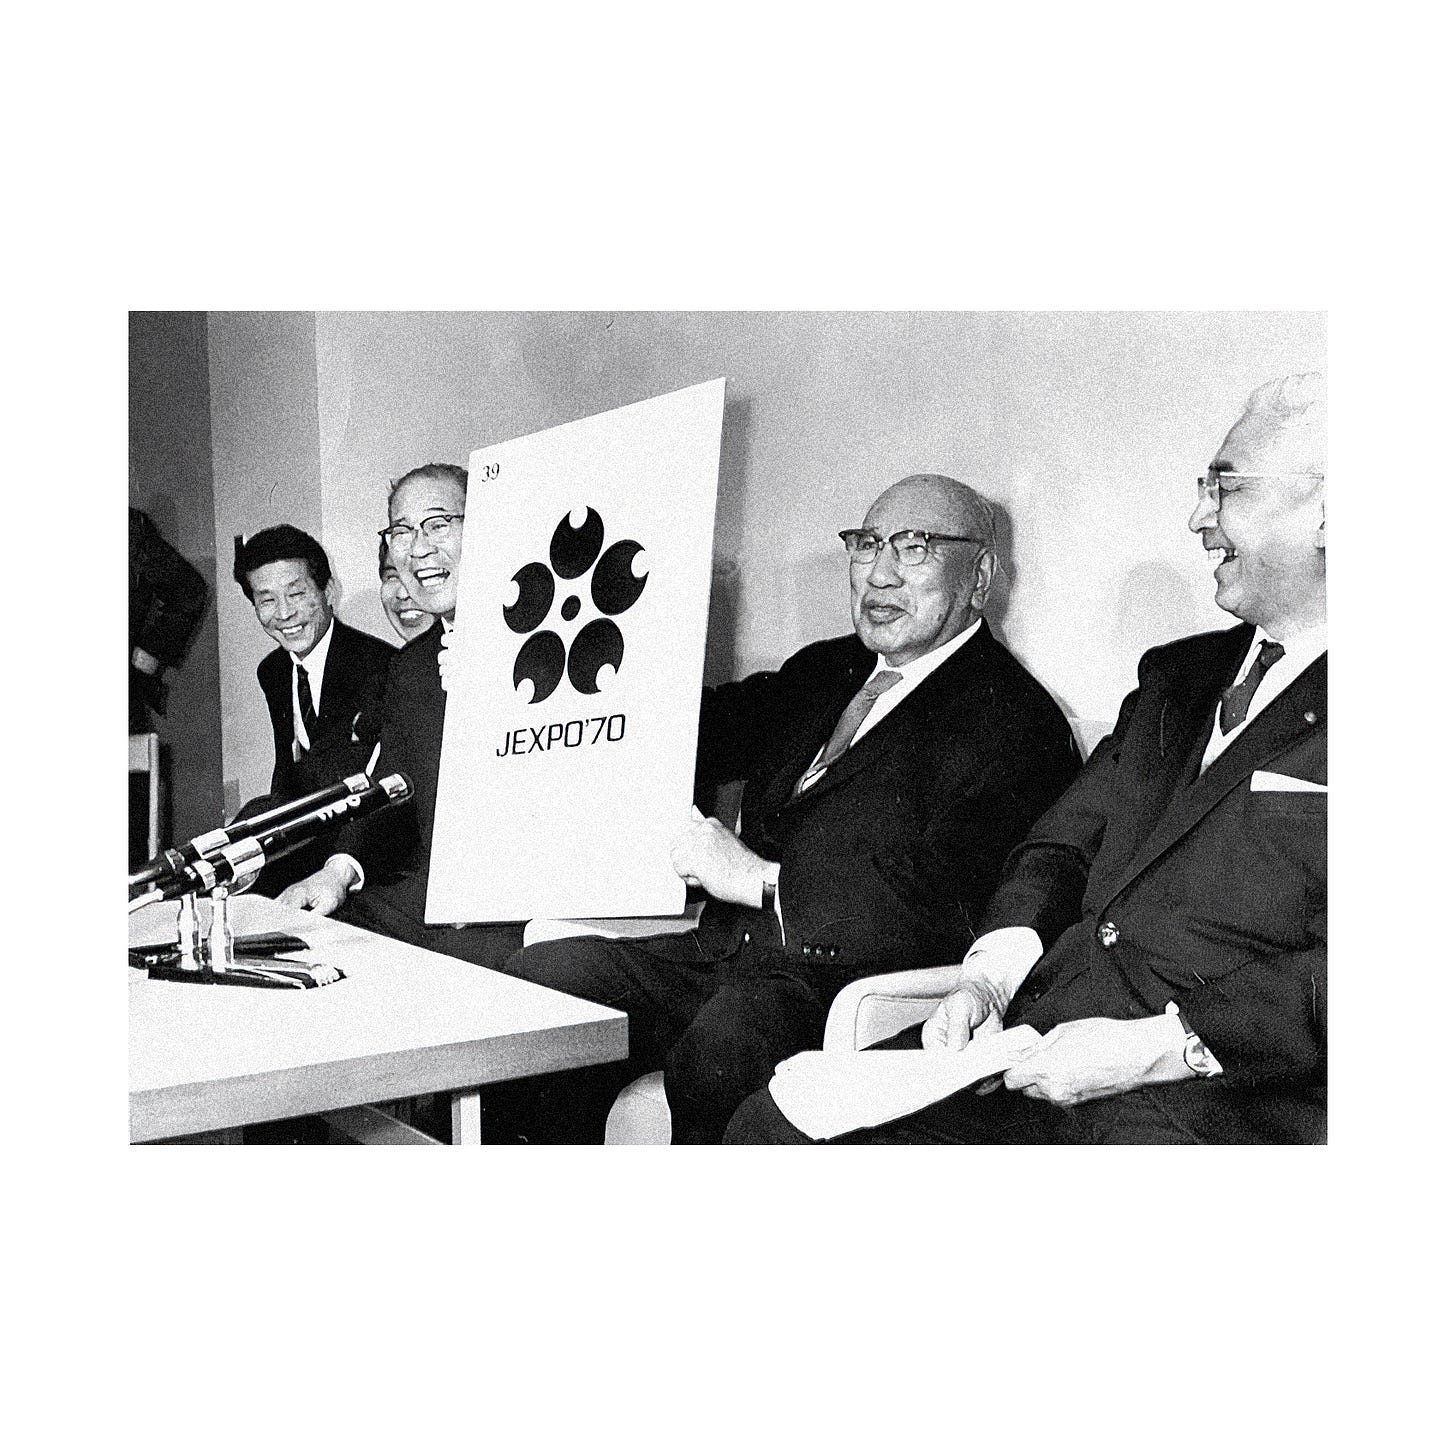 The Expo 70 committee select the winning design